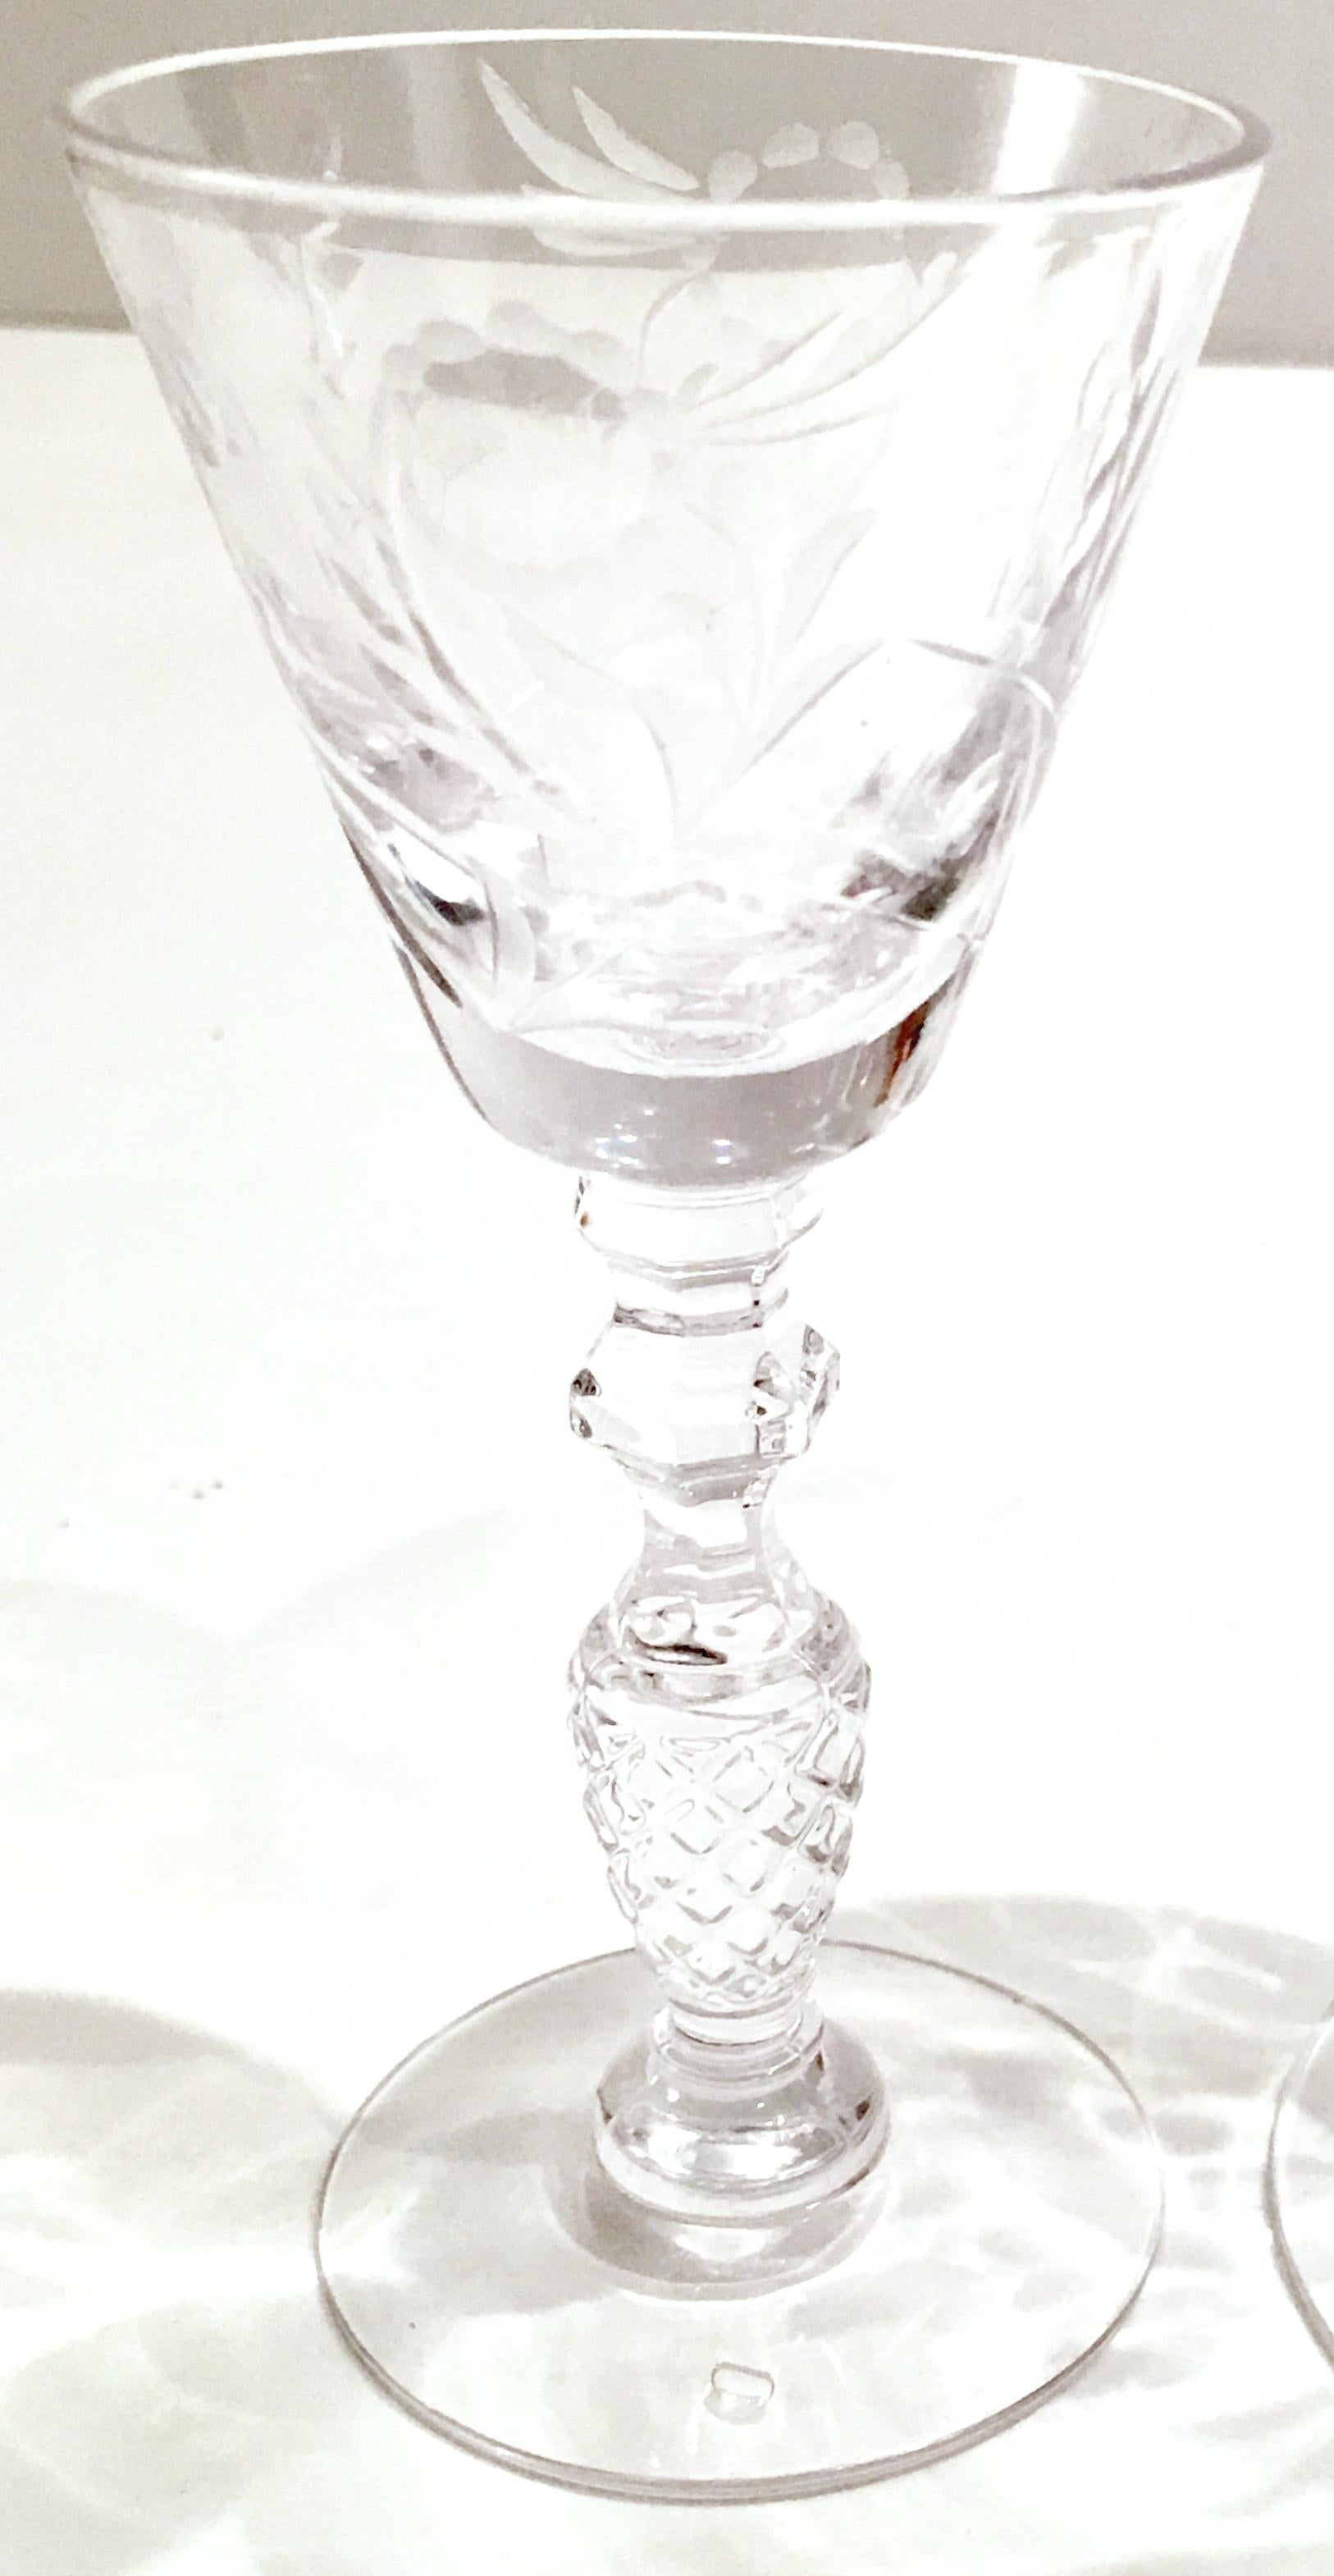 Mid-20th Century American Cut and Etched Crystal Stem Glasses S/8 For Sale 2